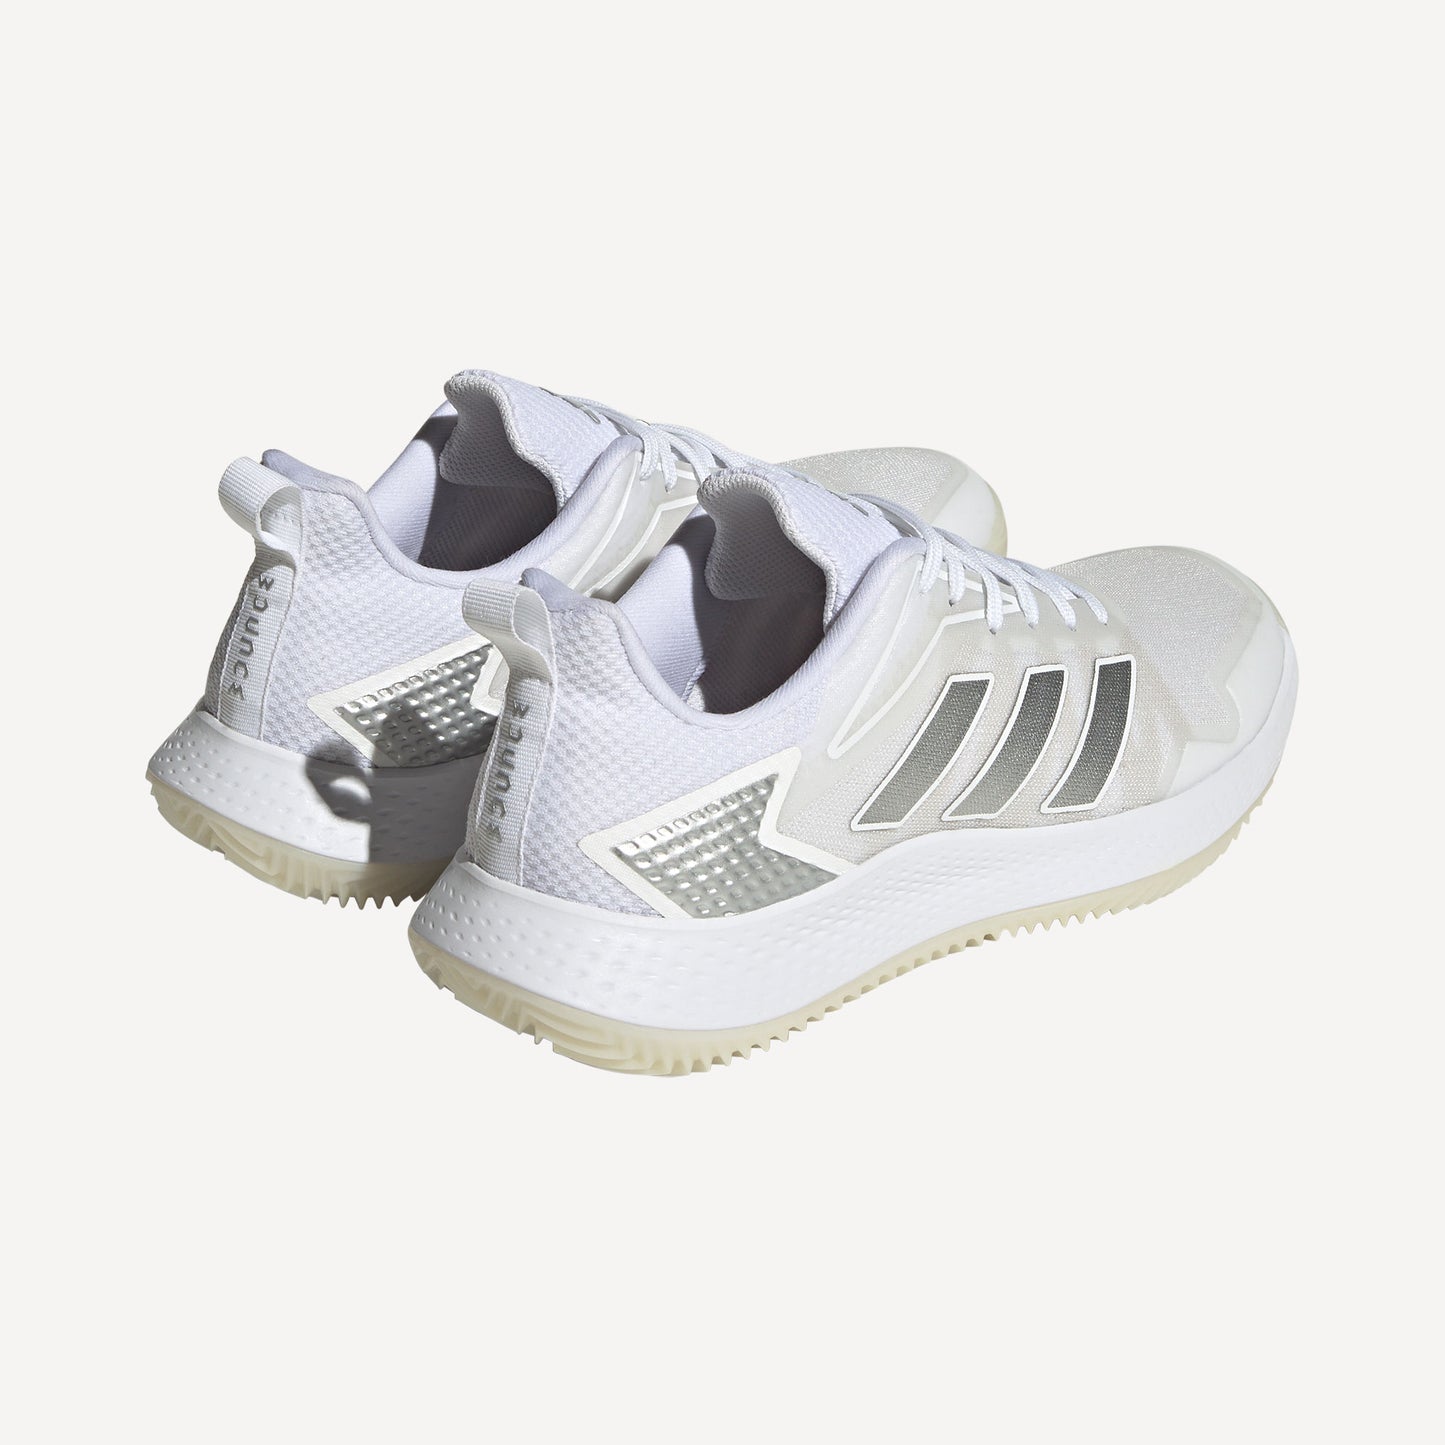 adidas Defiant Speed Women's Clay Court Tennis Shoes White (6)